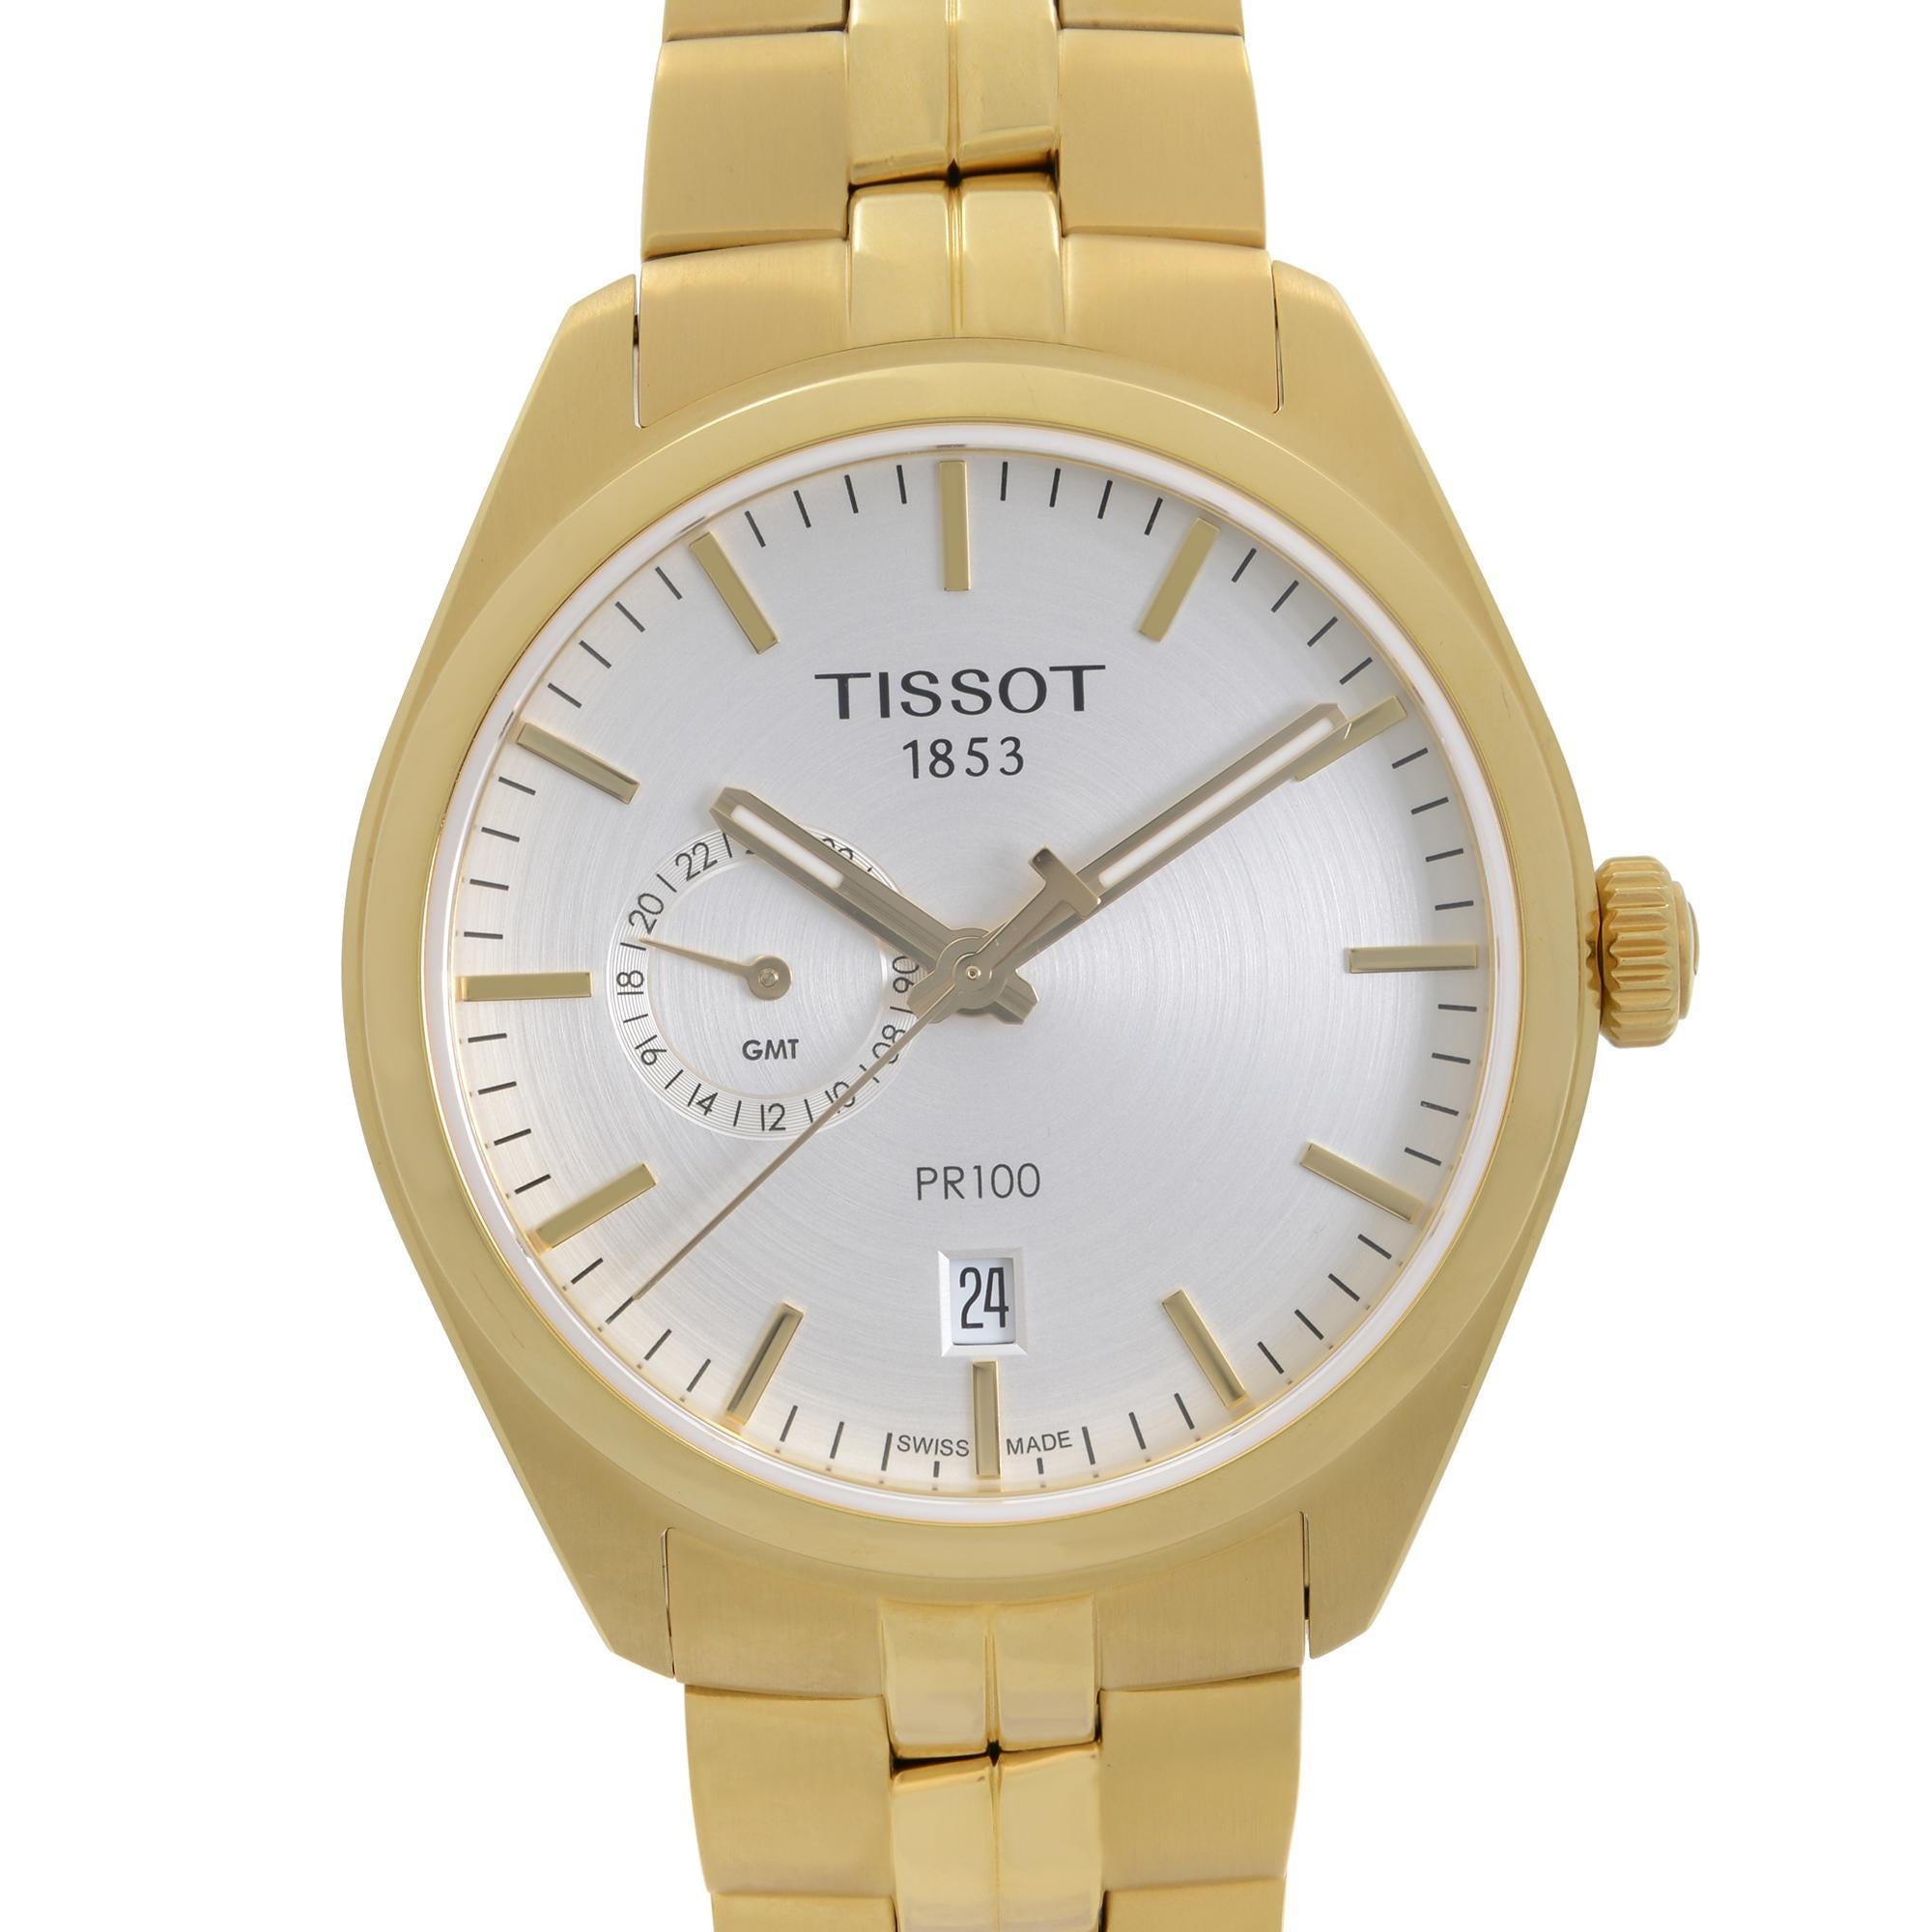 Pre-owned Tissot PR 100 Dual Time Gold-Tone Silver Dial Men's Quartz Watch T101.452.33.031.00. The watch was never owned or worn but has some Micro Scratches on Bezel and Bracelet due to storing and Handling. Original Box and Papers are